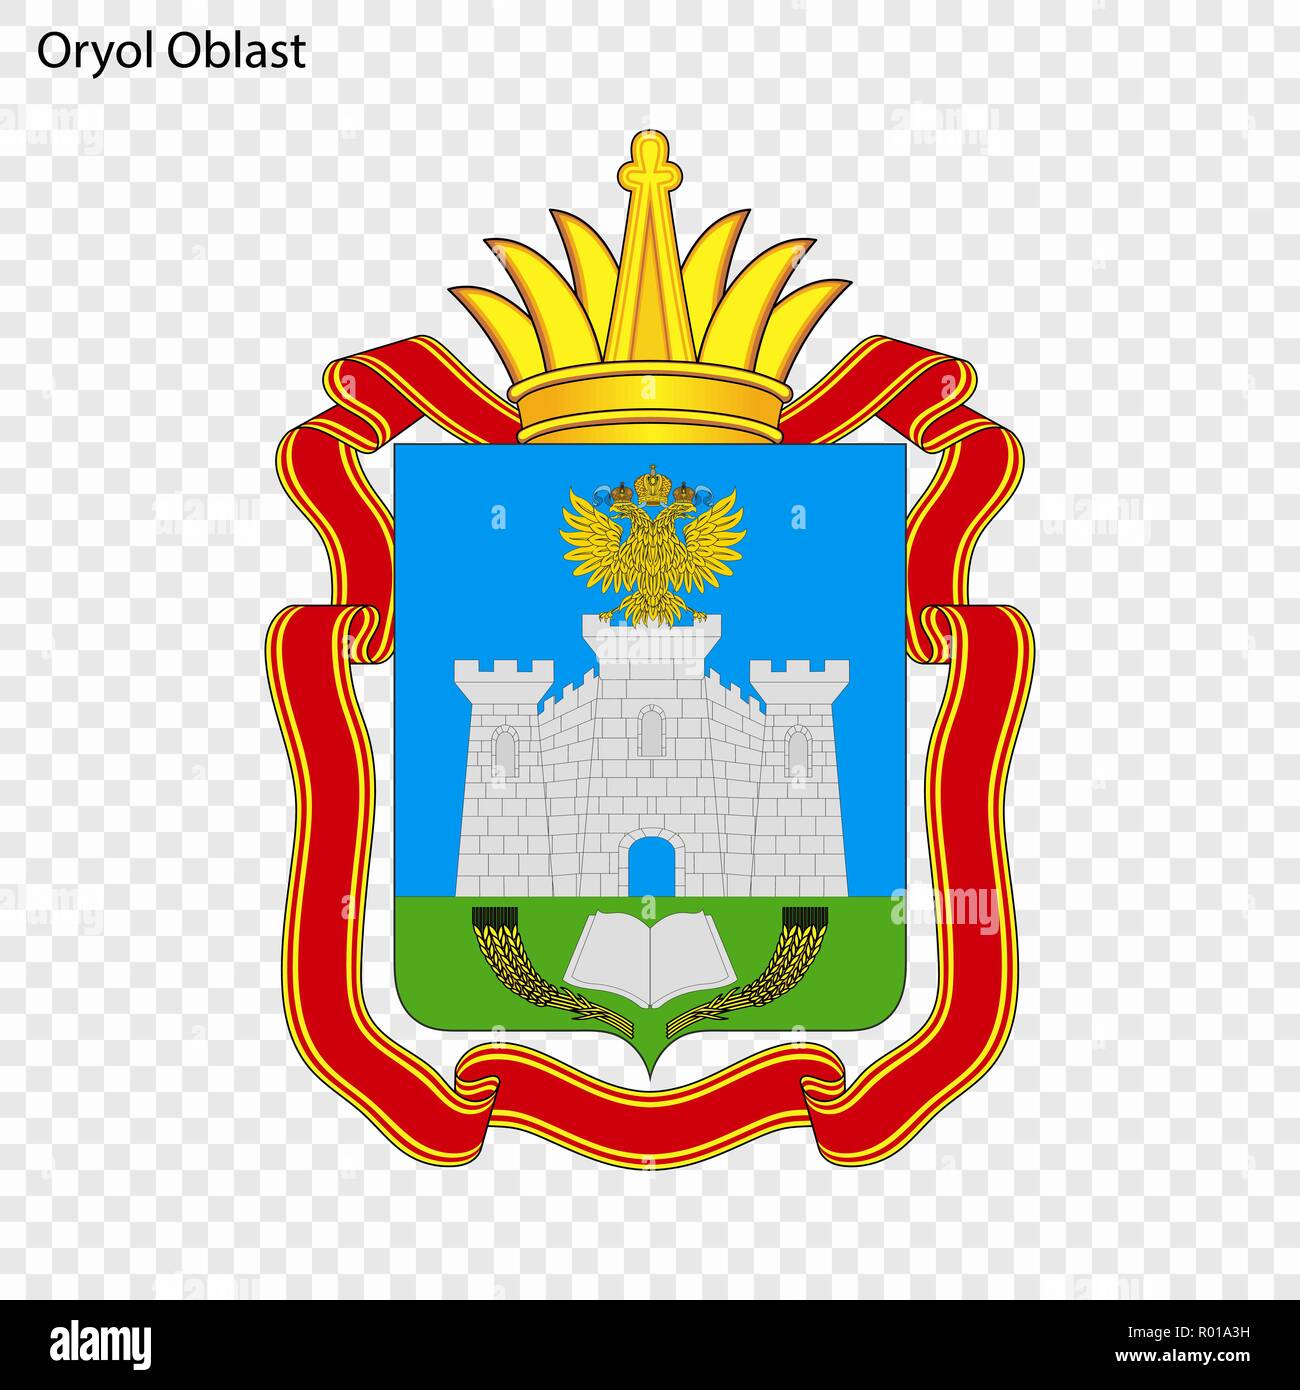 Emblem of Oryol Oblast, province of Russia Stock Vector